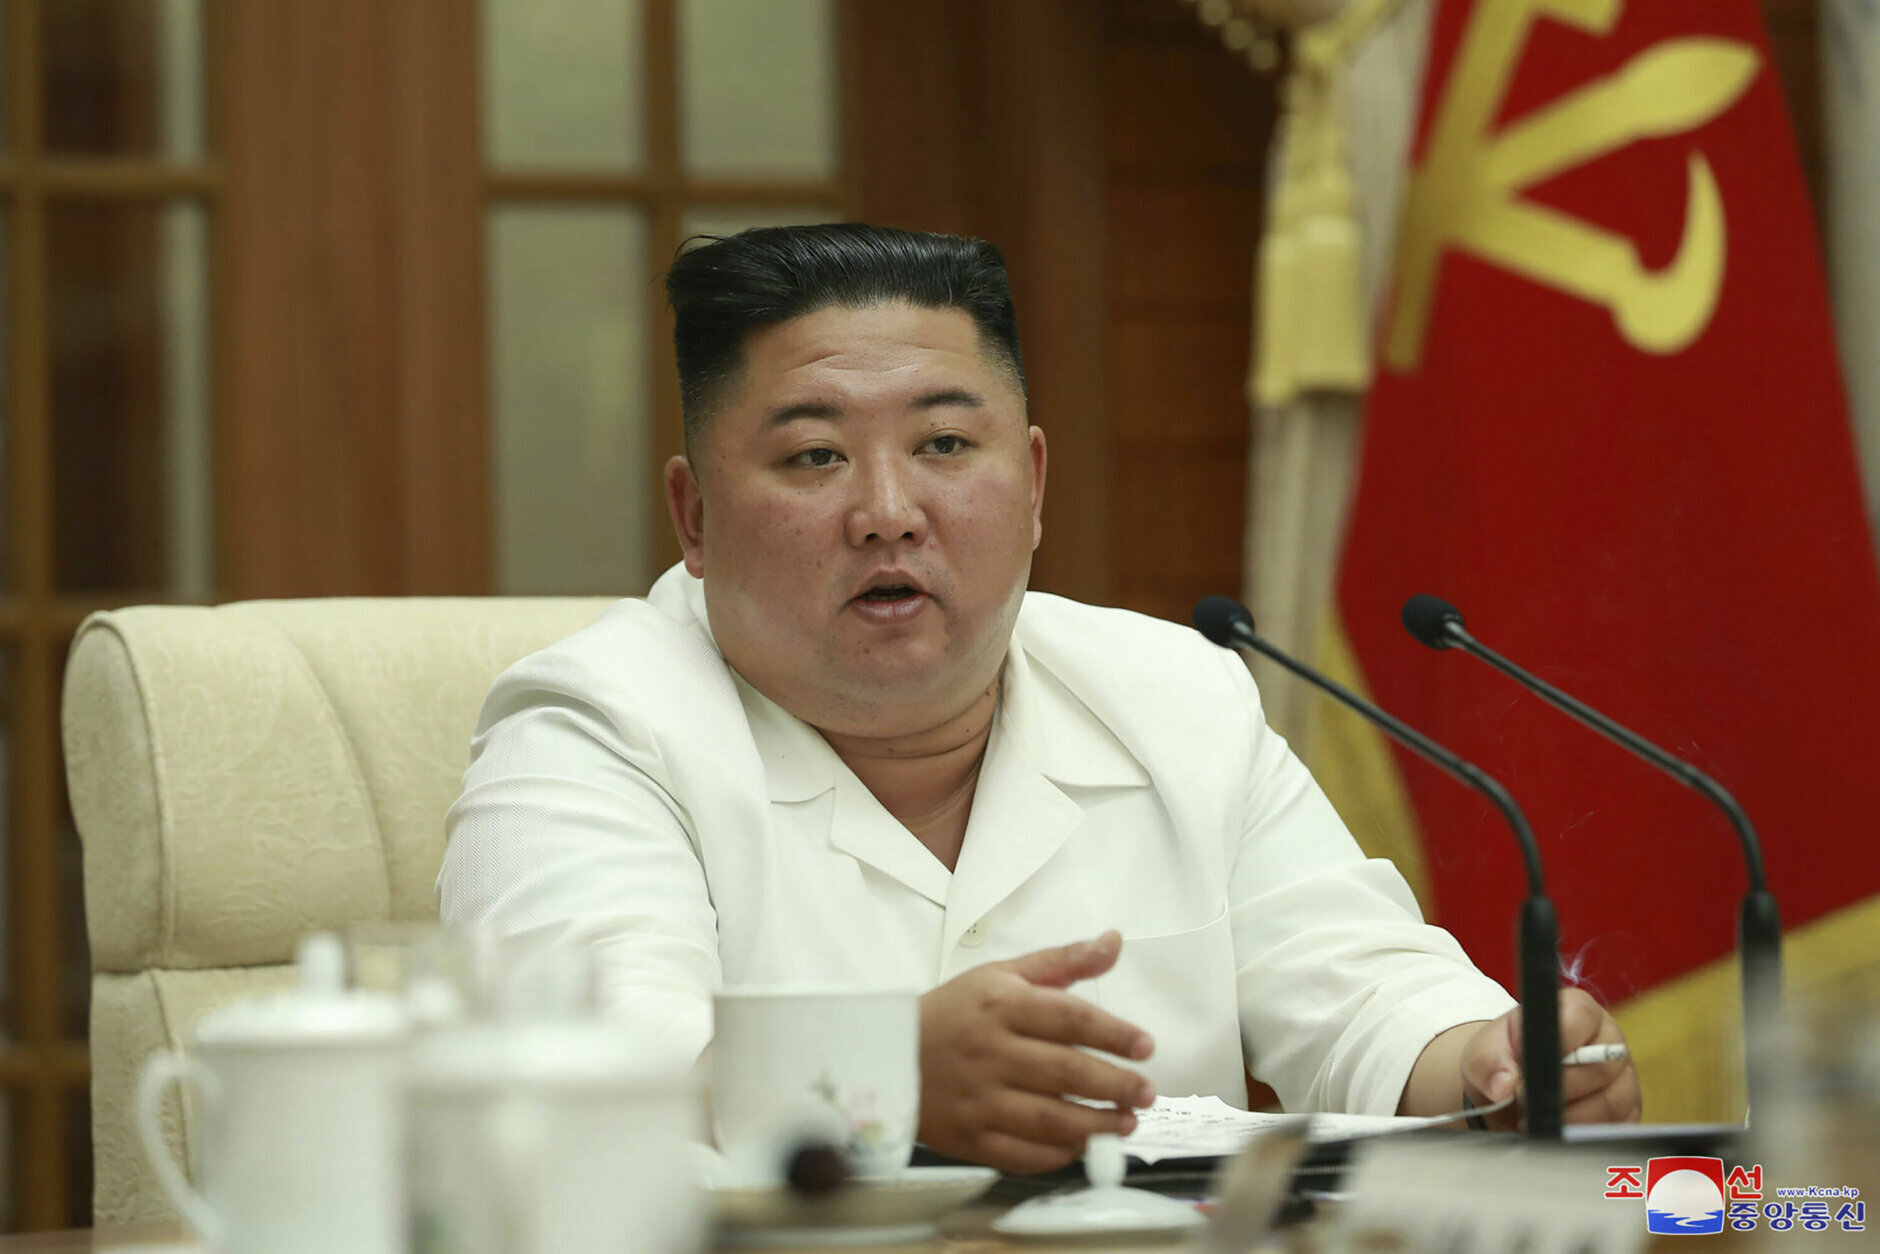 In this photo provided by the North Korean government, North Korean leader Kim Jong Un attends an enlarged meeting of the Politburo of the ruling Workers’ Party in Pyongyang, North Korea, Tuesday, Aug. 25, 2020. Independent journalists were not given access to cover the event depicted in this image distributed by the North Korean government. The content of this image is as provided and cannot be independently verified. Korean language watermark on image as provided by source reads: "KCNA" which is the abbreviation for Korean Central News Agency. (Korean Central News Agency/Korea News Service via AP)